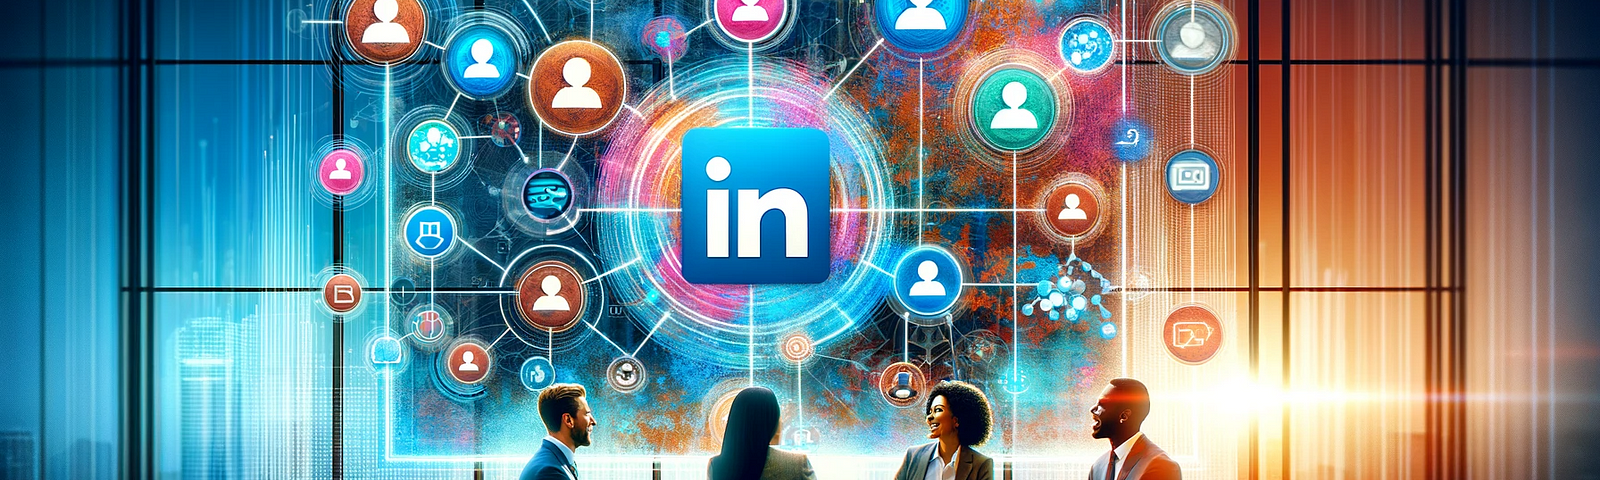 The image features a modern corporate setting with professionals engaged in strategic planning, aligning with the topic of LinkedIn Tactics from Riser Club.